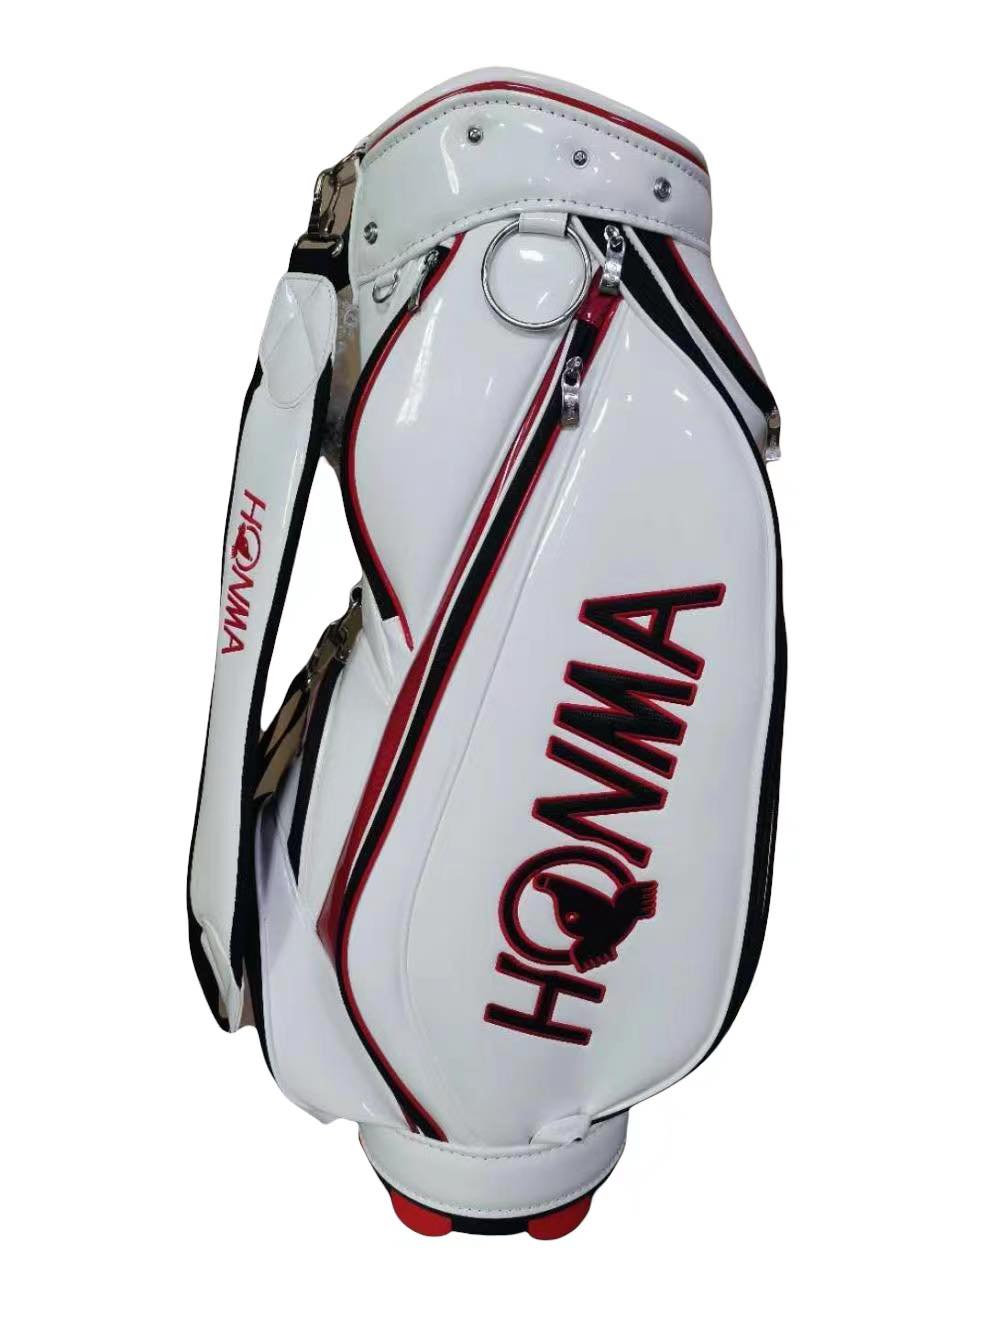 HONMA Golf Bag with Top Cover Water-Proof PU Leather Finish